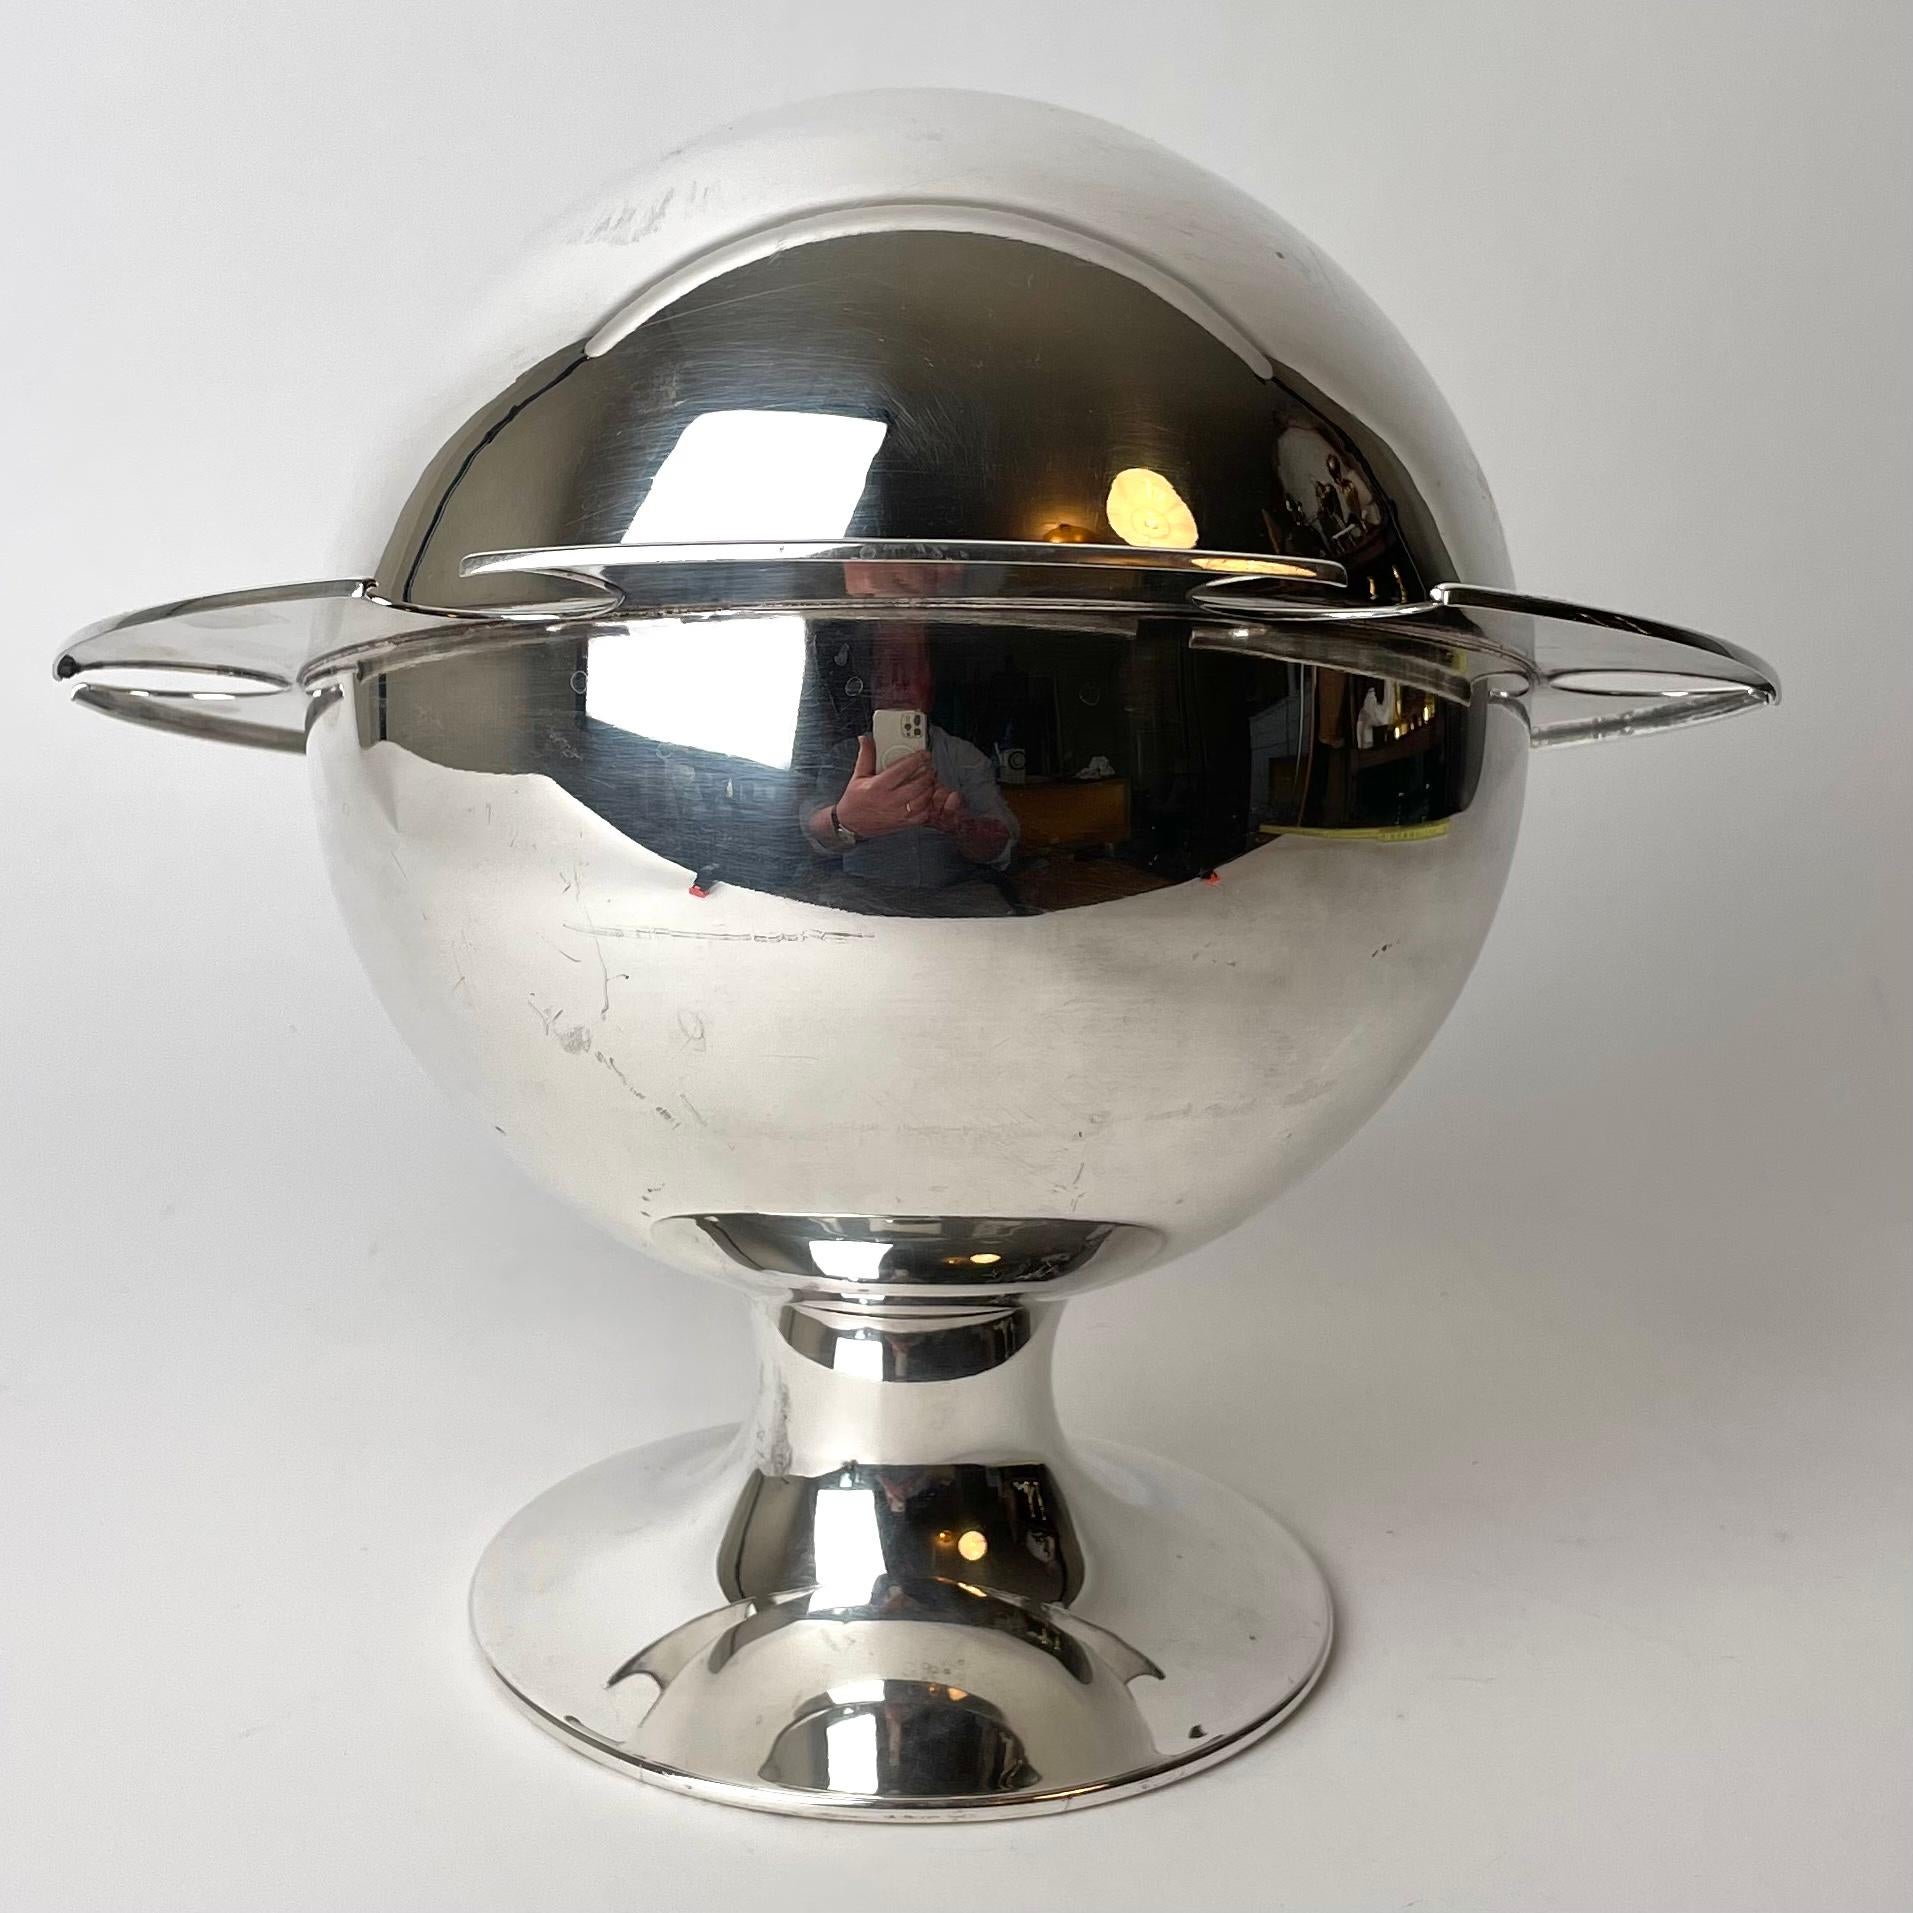 Mid-20th Century Cool Champagne Cooler with Glass Rack in Silver Plating, ”Space Age”, 1960s